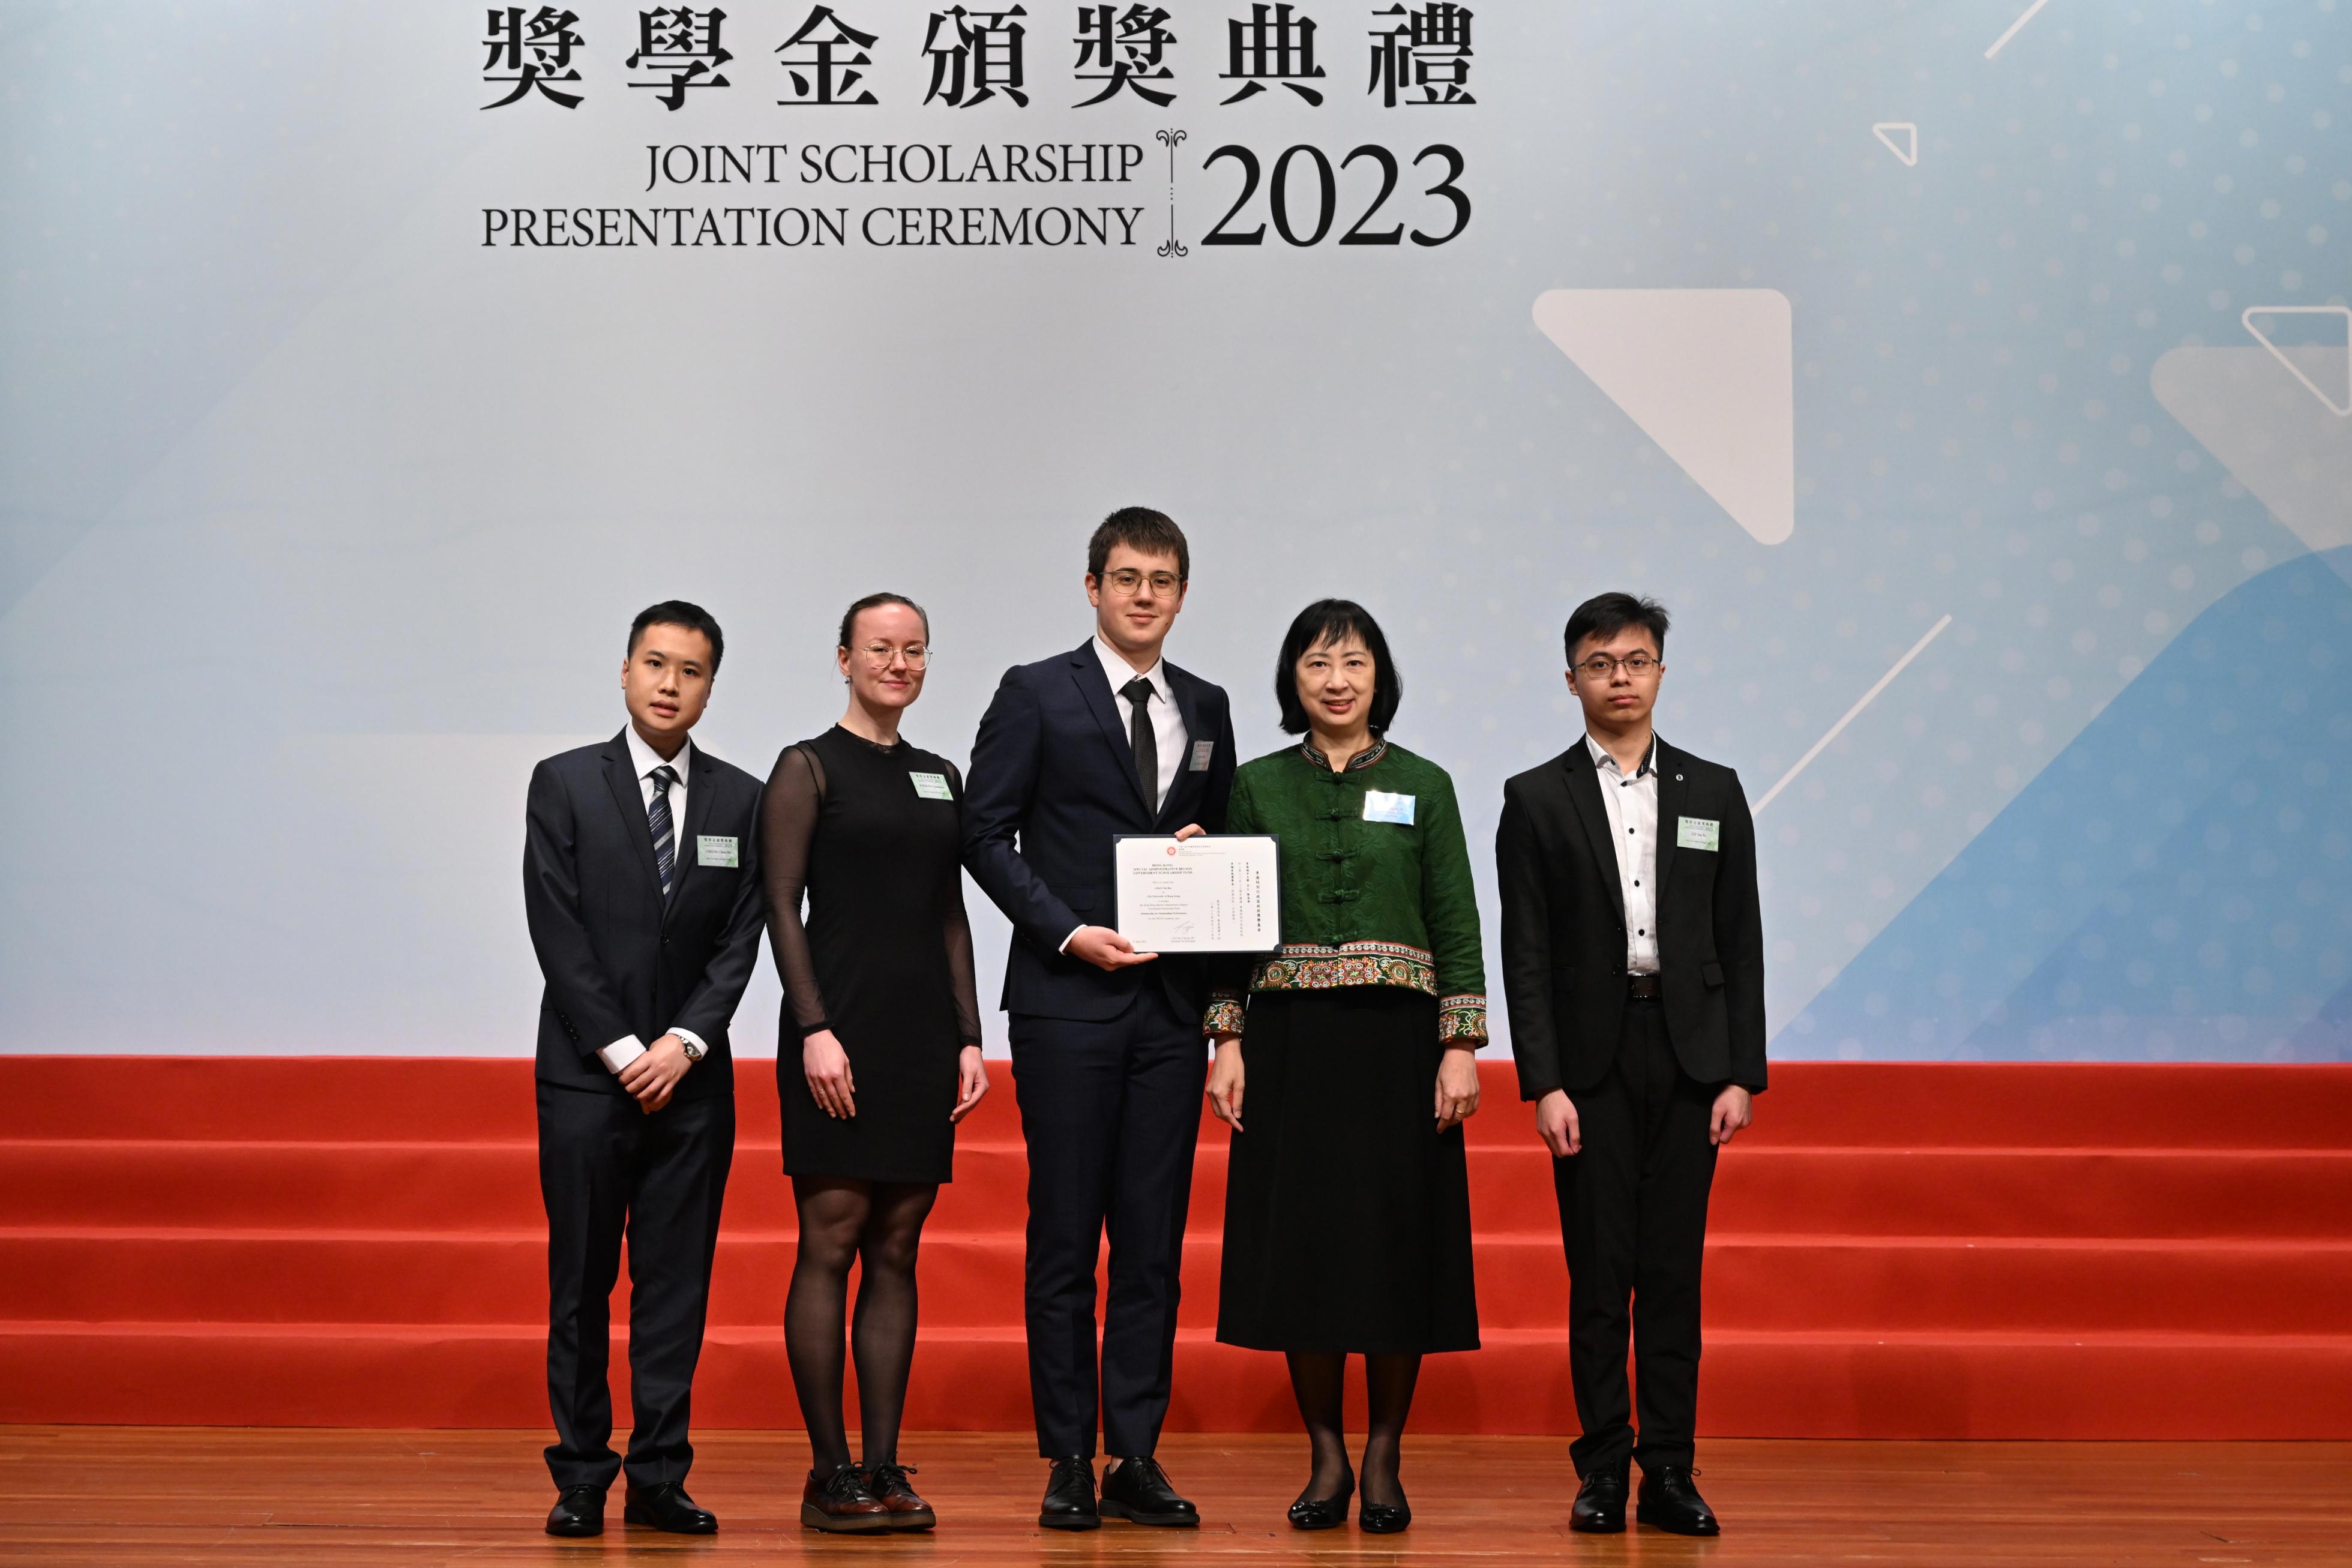 The Education Bureau held the HKSAR Government Scholarship Fund and Self-financing Post-secondary Education Fund Joint Scholarship Presentation Ceremony today (April 25). Photo shows the Permanent Secretary for Education, Ms Michelle Li (second right), presenting a certificate to students who are awarded scholarships under the HKSAR Government Scholarship Fund.